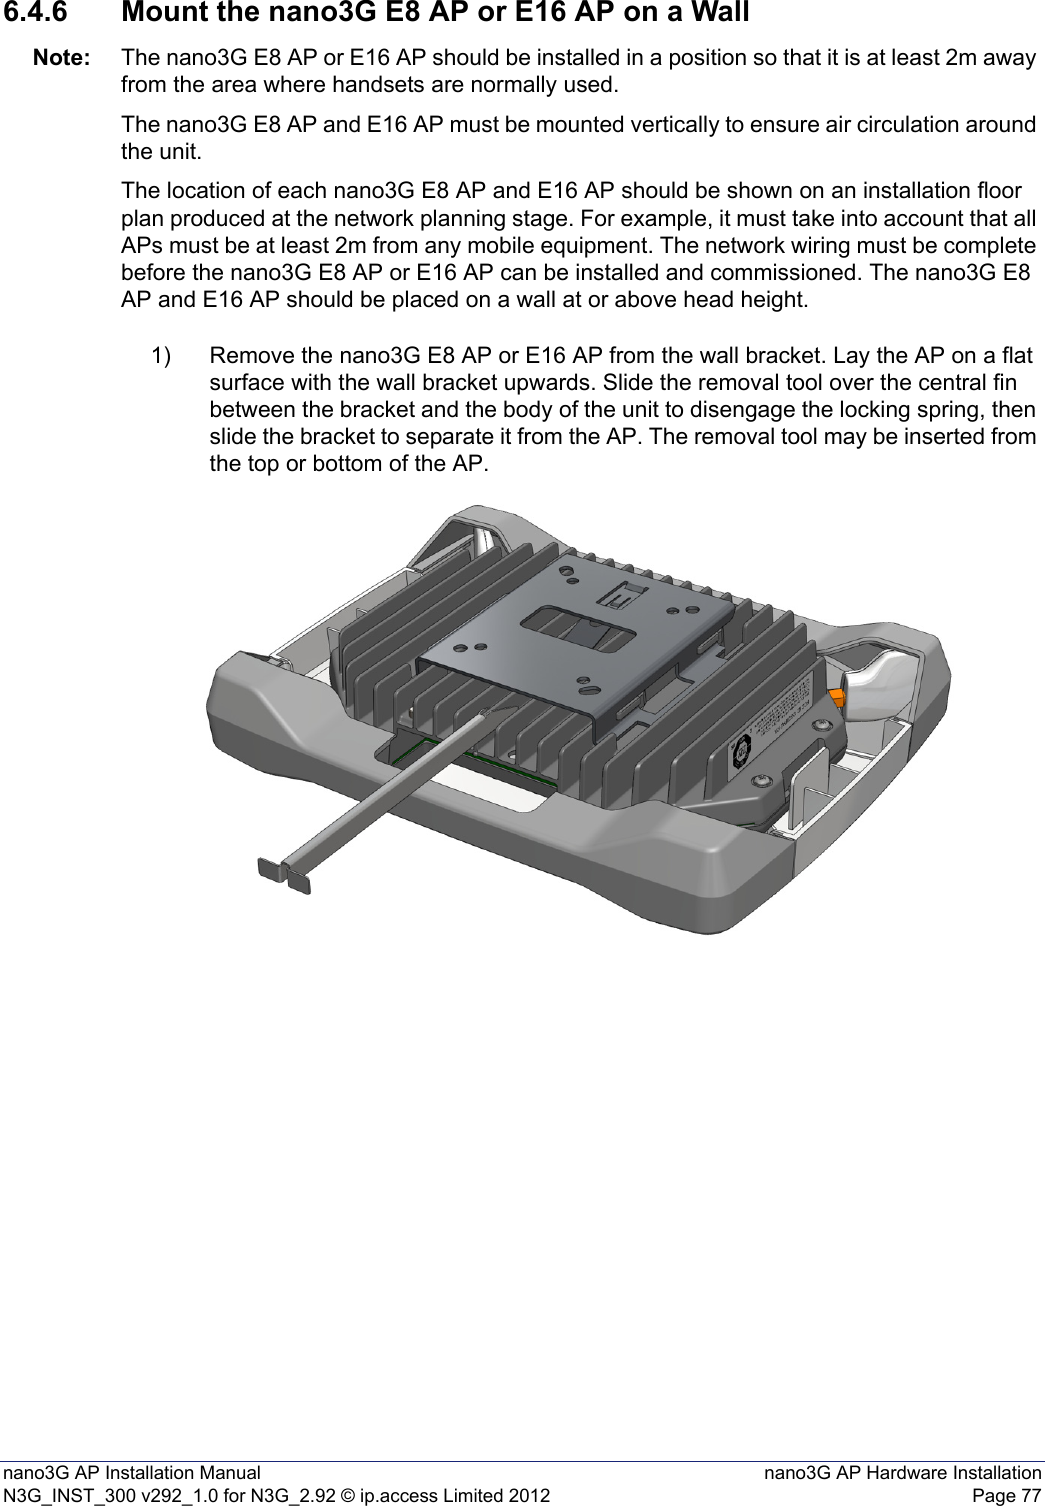 nano3G AP Installation Manual nano3G AP Hardware InstallationN3G_INST_300 v292_1.0 for N3G_2.92 © ip.access Limited 2012 Page 776.4.6 Mount the nano3G E8 AP or E16 AP on a WallNote: The nano3G E8 AP or E16 AP should be installed in a position so that it is at least 2m away from the area where handsets are normally used.The nano3G E8 AP and E16 AP must be mounted vertically to ensure air circulation around the unit.The location of each nano3G E8 AP and E16 AP should be shown on an installation floor plan produced at the network planning stage. For example, it must take into account that all APs must be at least 2m from any mobile equipment. The network wiring must be complete before the nano3G E8 AP or E16 AP can be installed and commissioned. The nano3G E8 AP and E16 AP should be placed on a wall at or above head height.1) Remove the nano3G E8 AP or E16 AP from the wall bracket. Lay the AP on a flat surface with the wall bracket upwards. Slide the removal tool over the central fin between the bracket and the body of the unit to disengage the locking spring, then slide the bracket to separate it from the AP. The removal tool may be inserted from the top or bottom of the AP.